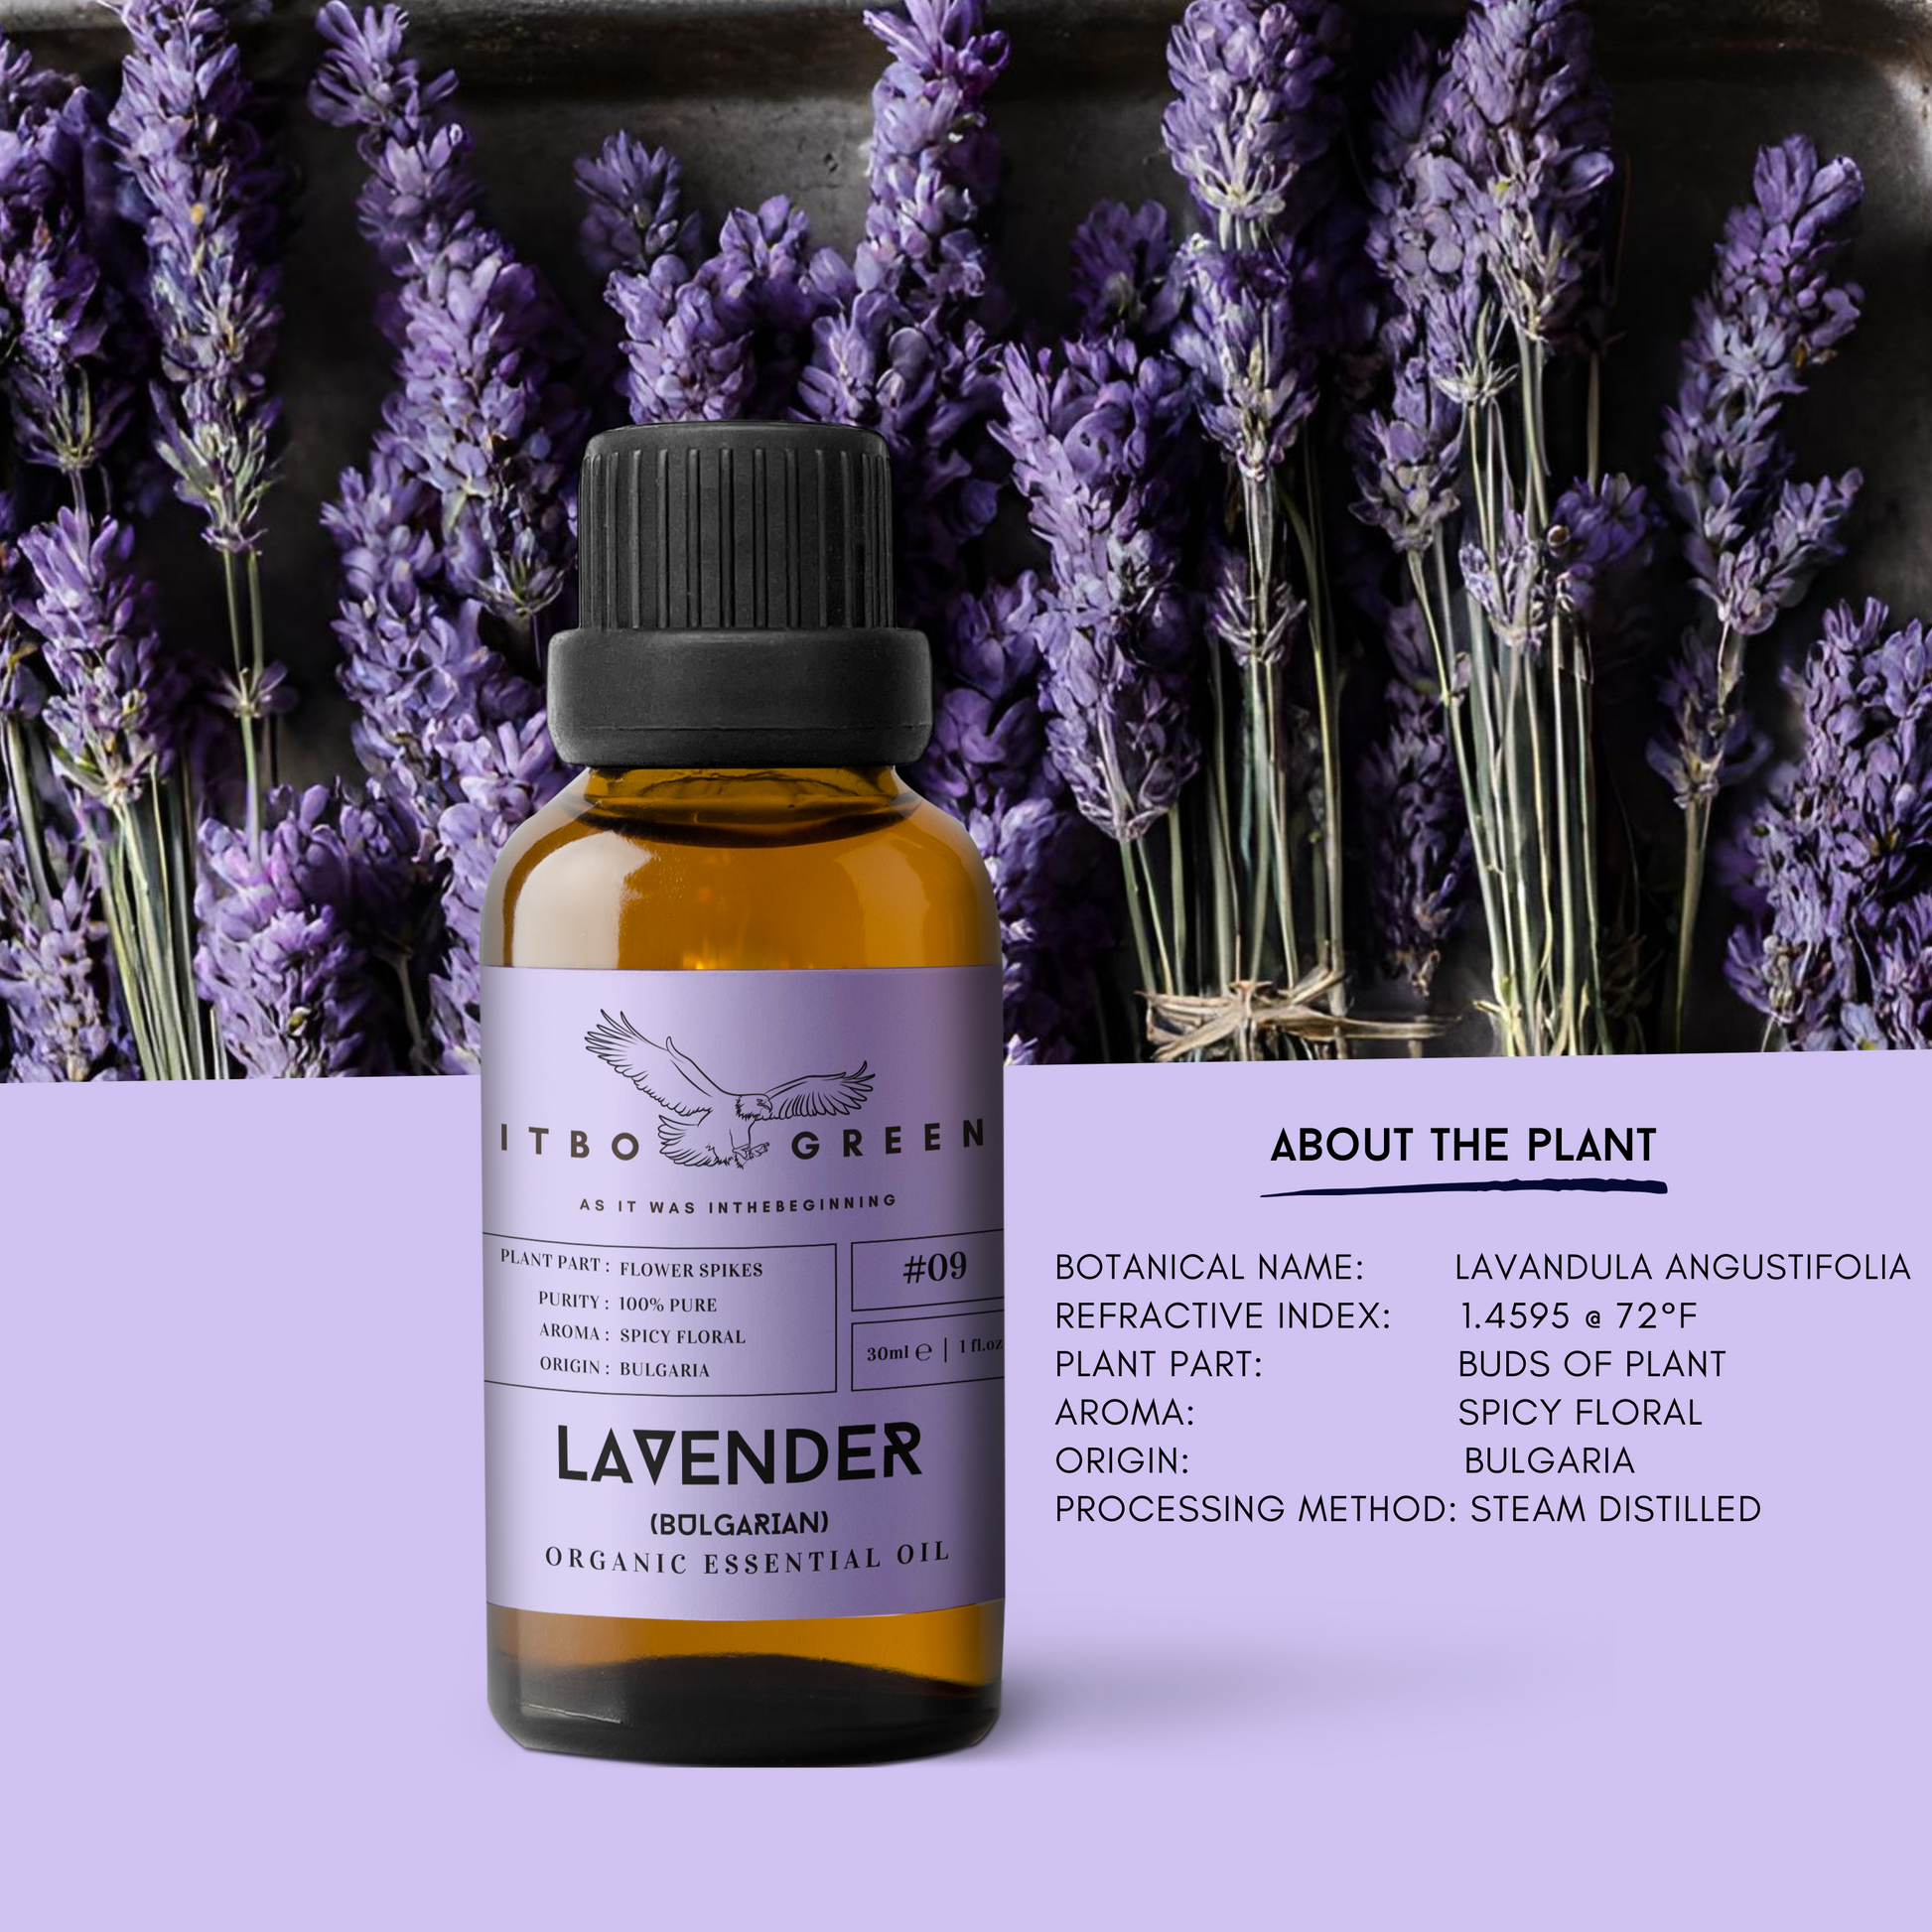 Organic Bulgarian Lavender Essential Oil | 30ml / 1oz UV Bottle | Pure Floral Oil | Unblended | Aromatherapy | Vegan | Spirituality| Nature Heals - ITBO Green